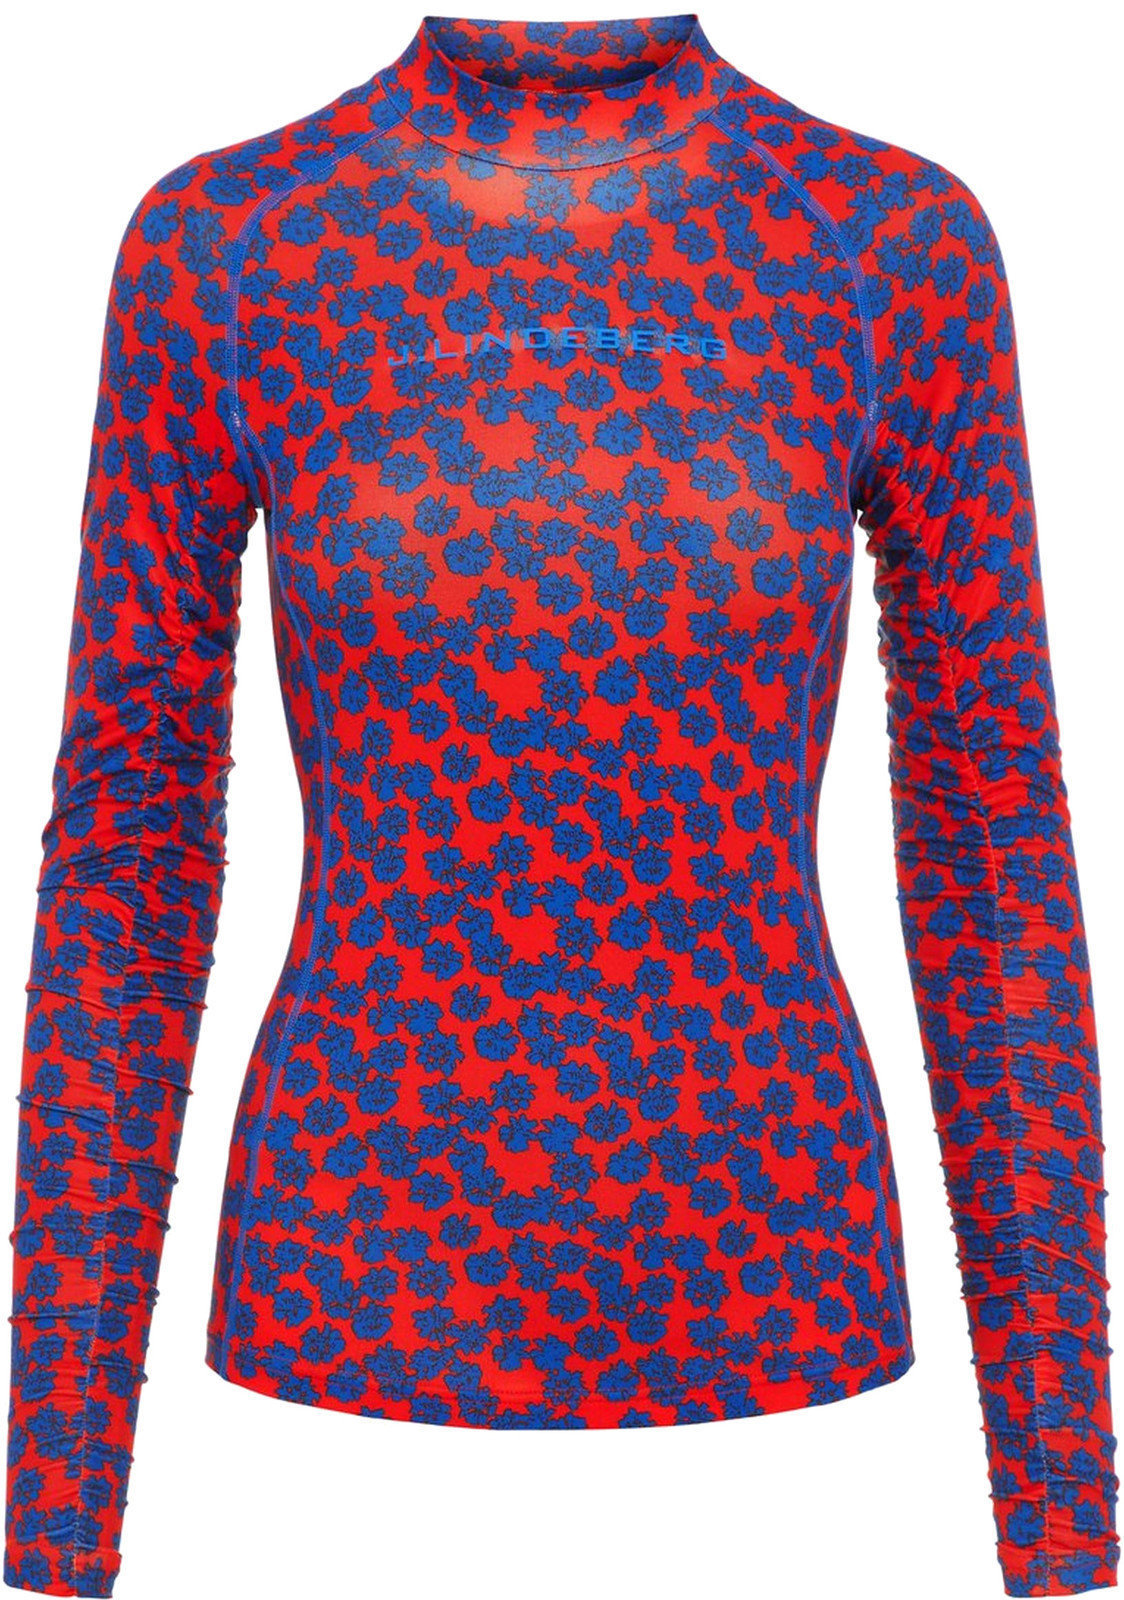 Thermal Clothing J.Lindeberg Tori Soft Compression Womens Base Layer Racing Red Flower S